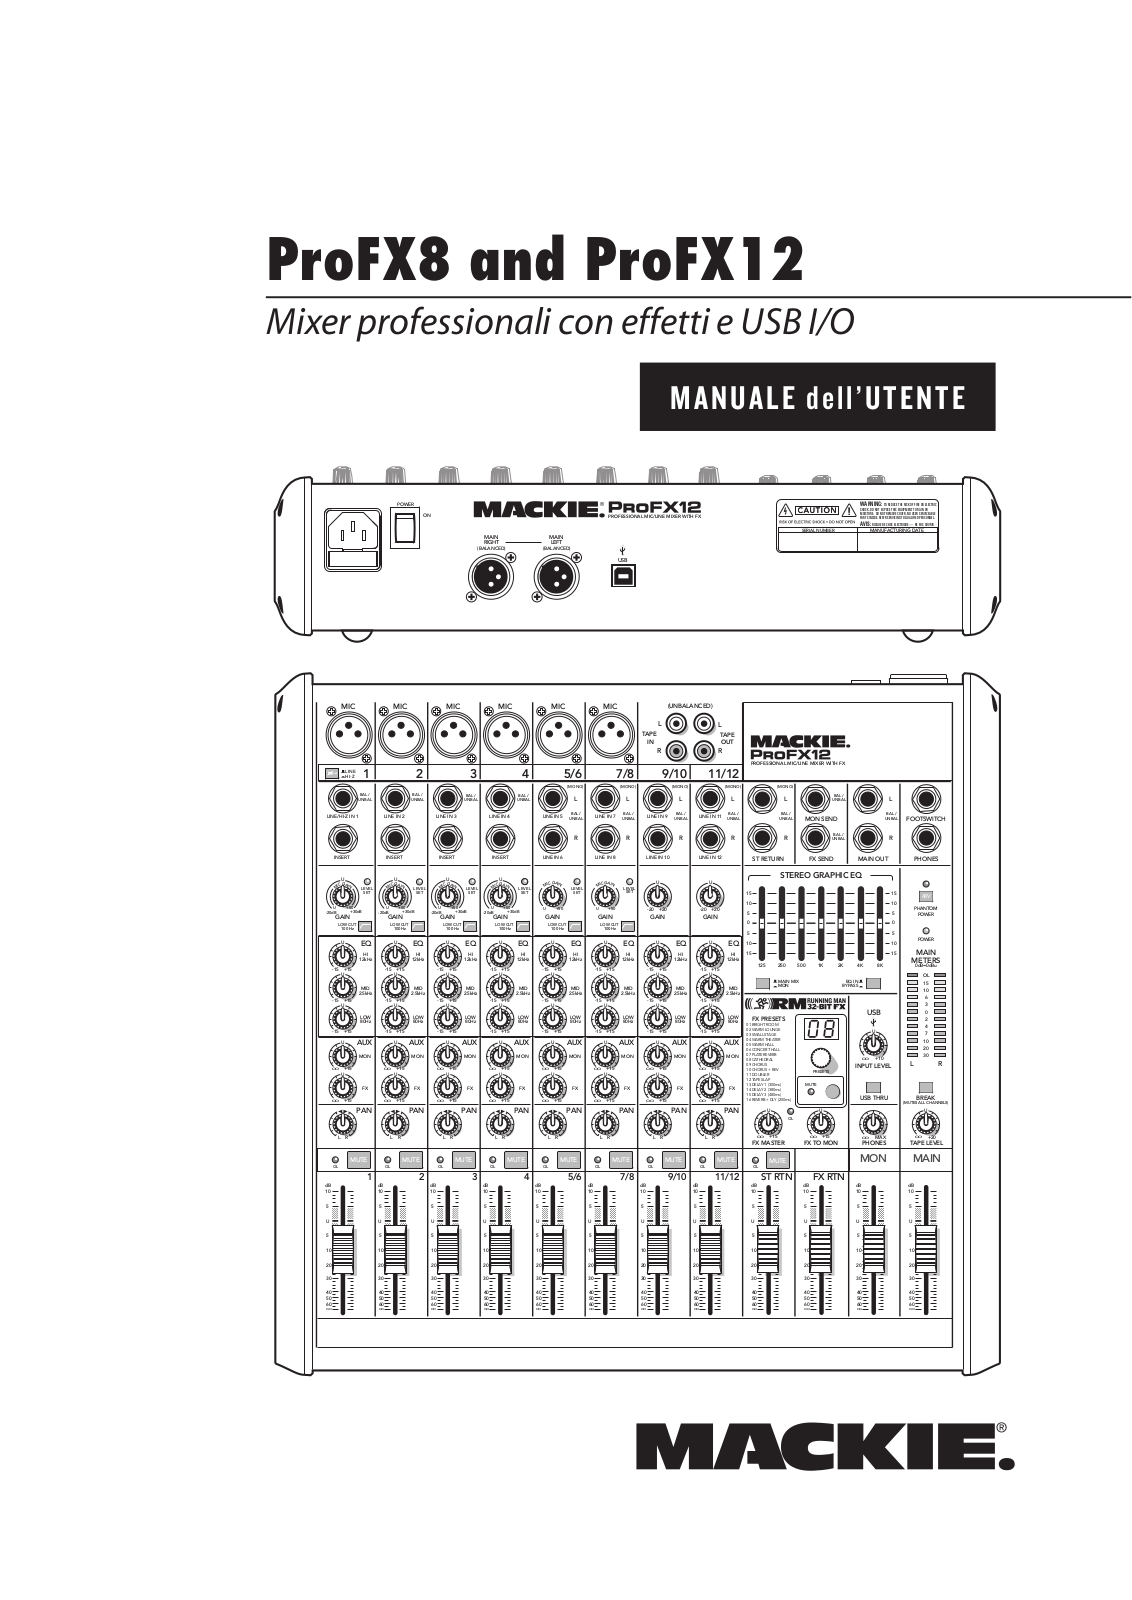 Mackie PRO FX12, PRO FX8 Owner's manual